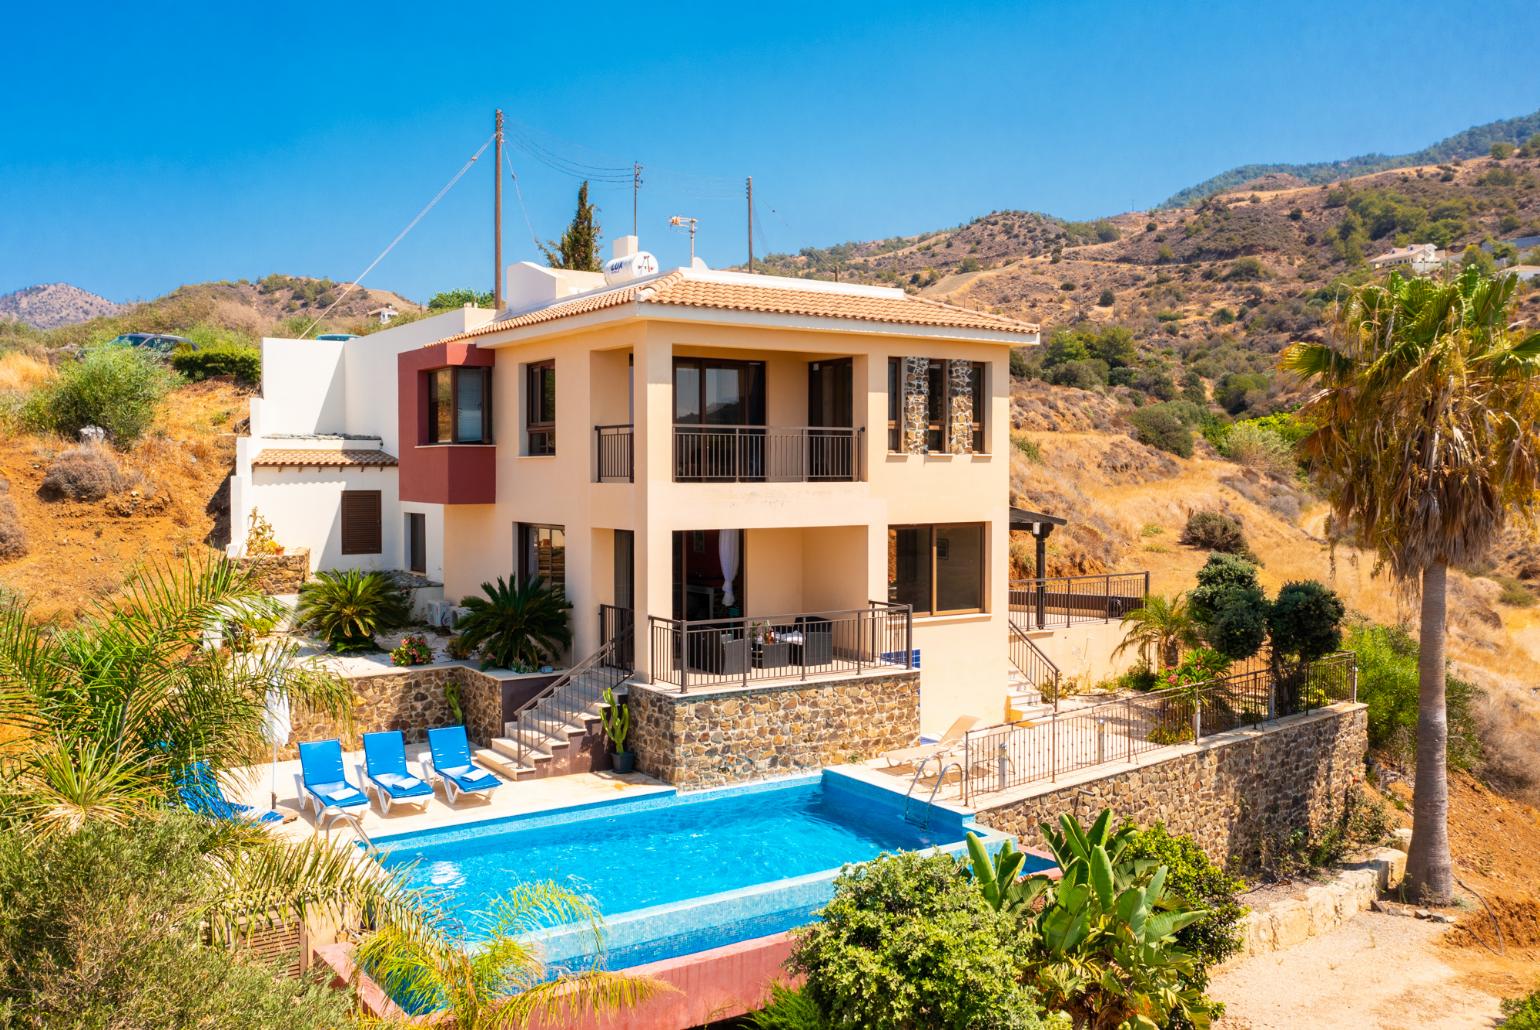 Beautiful villa with private infinity pool, terraces, and garden